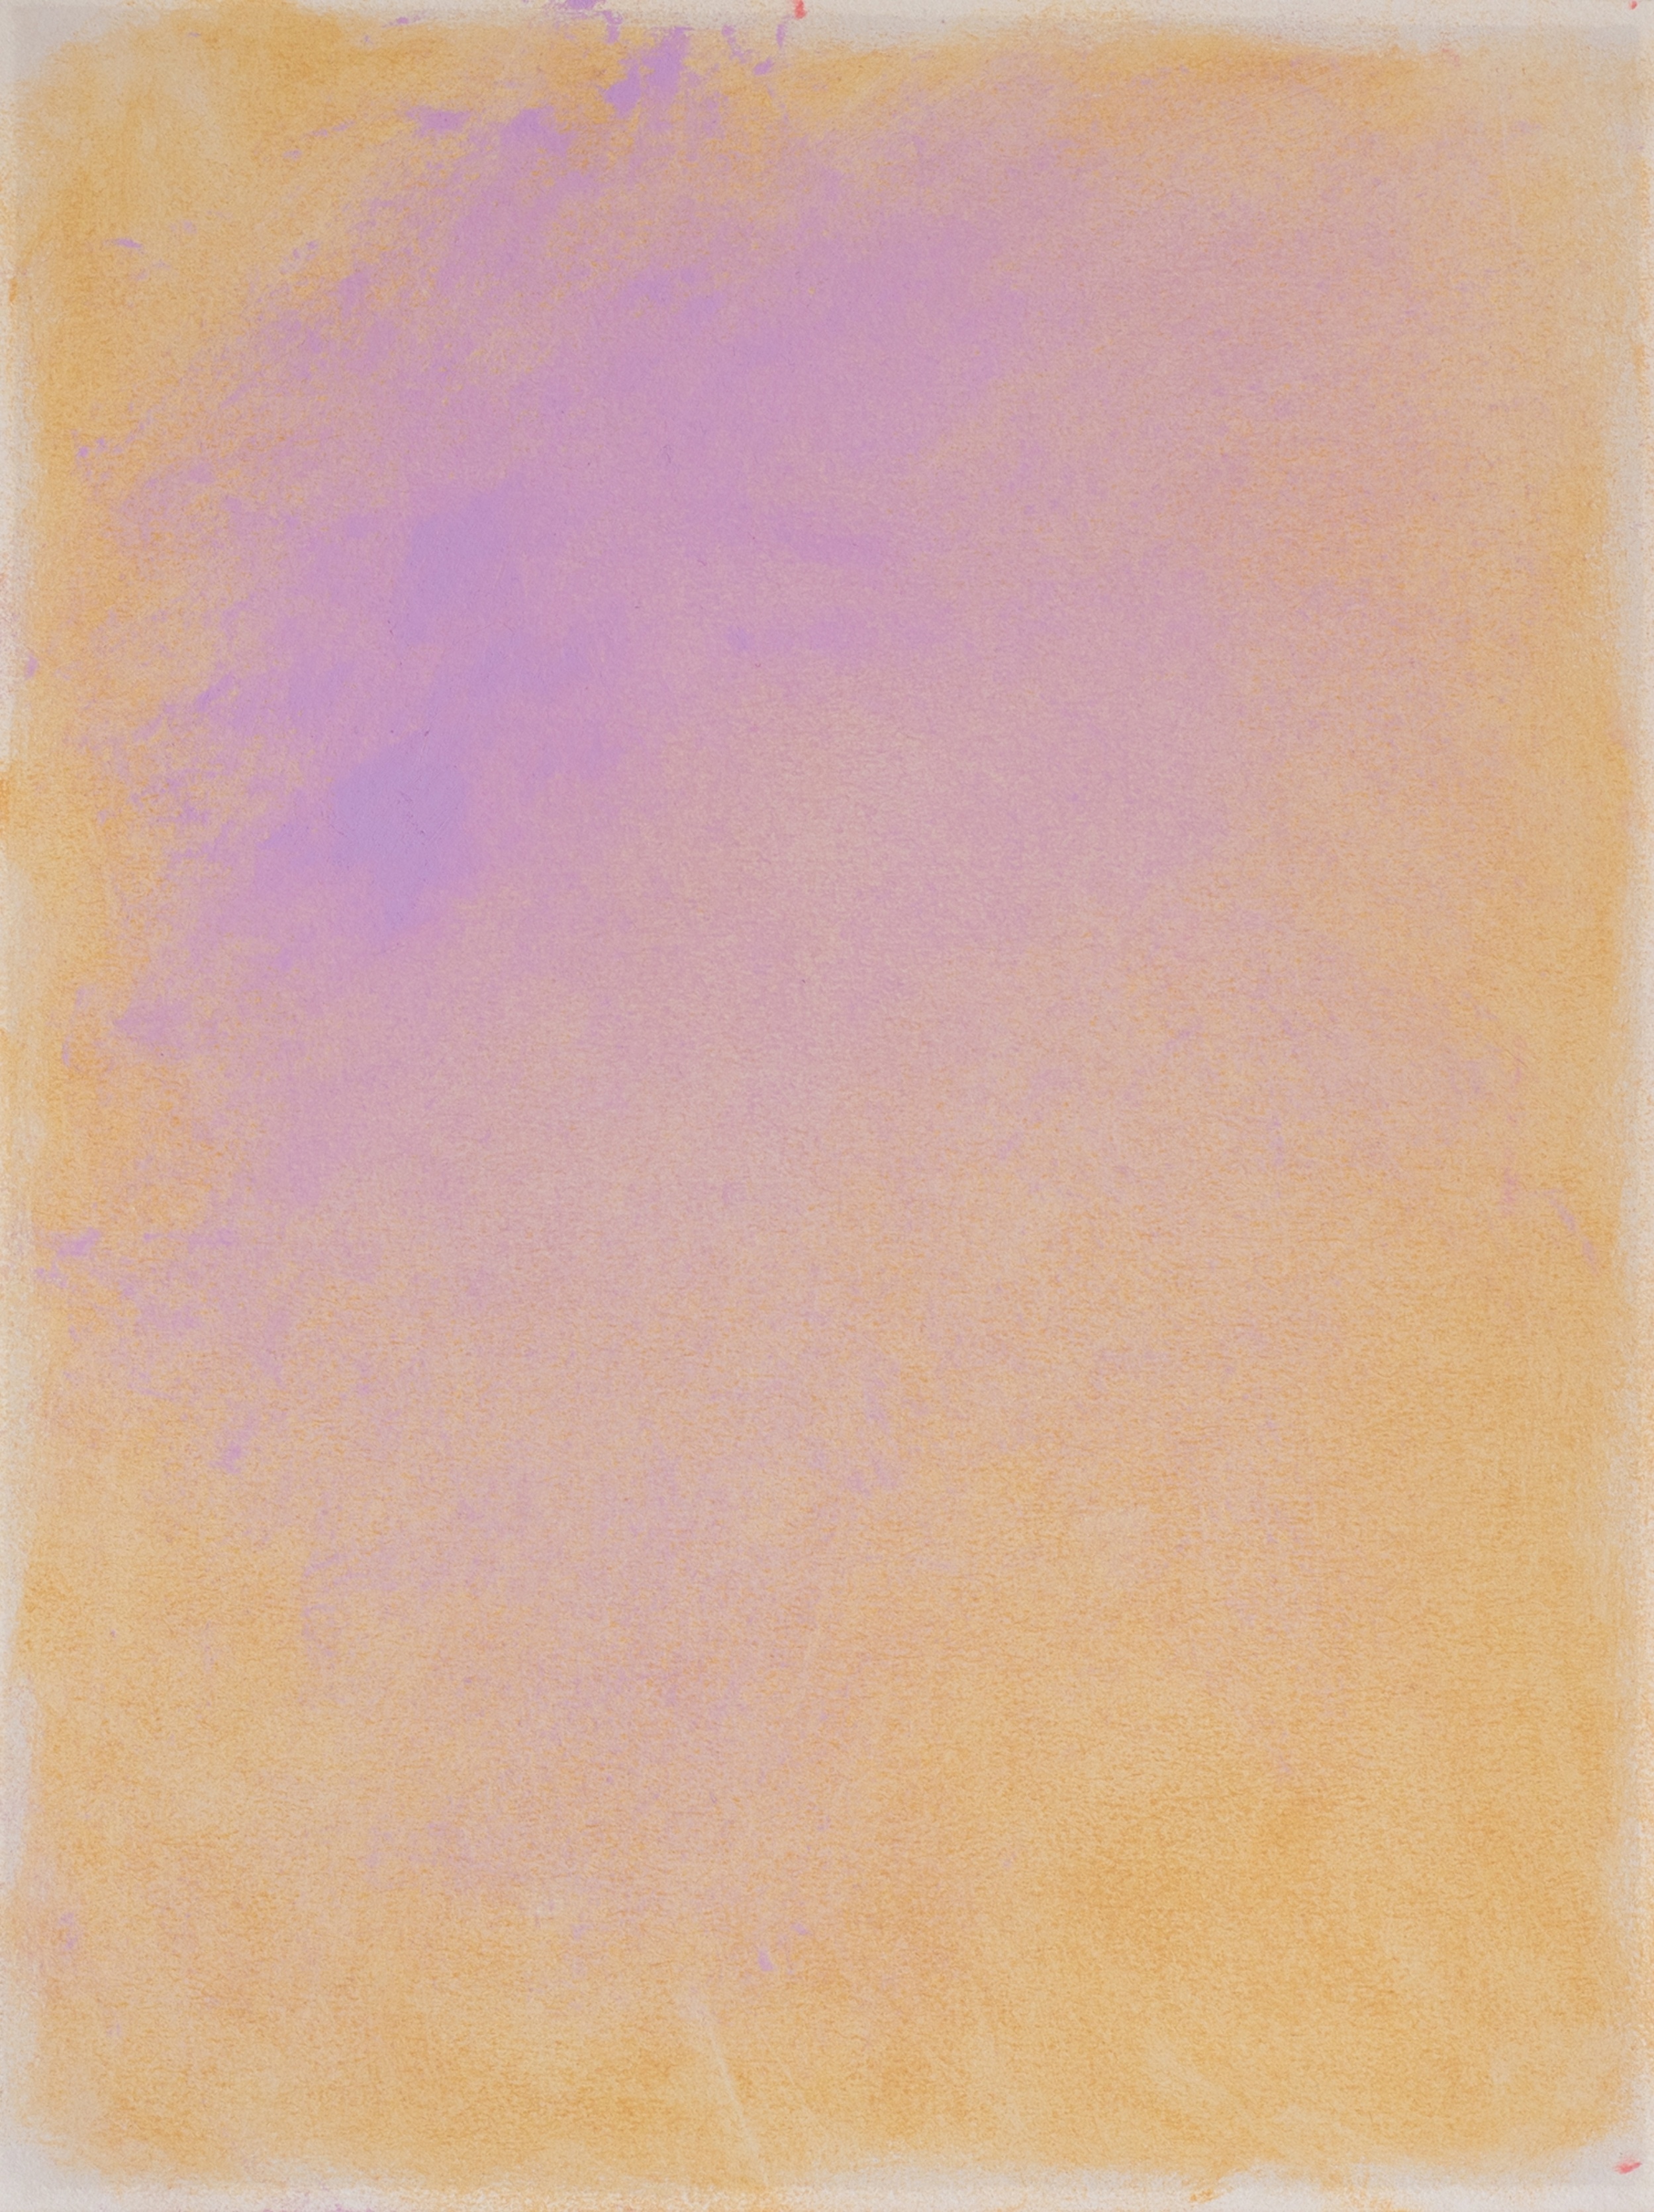 Violet and ochre